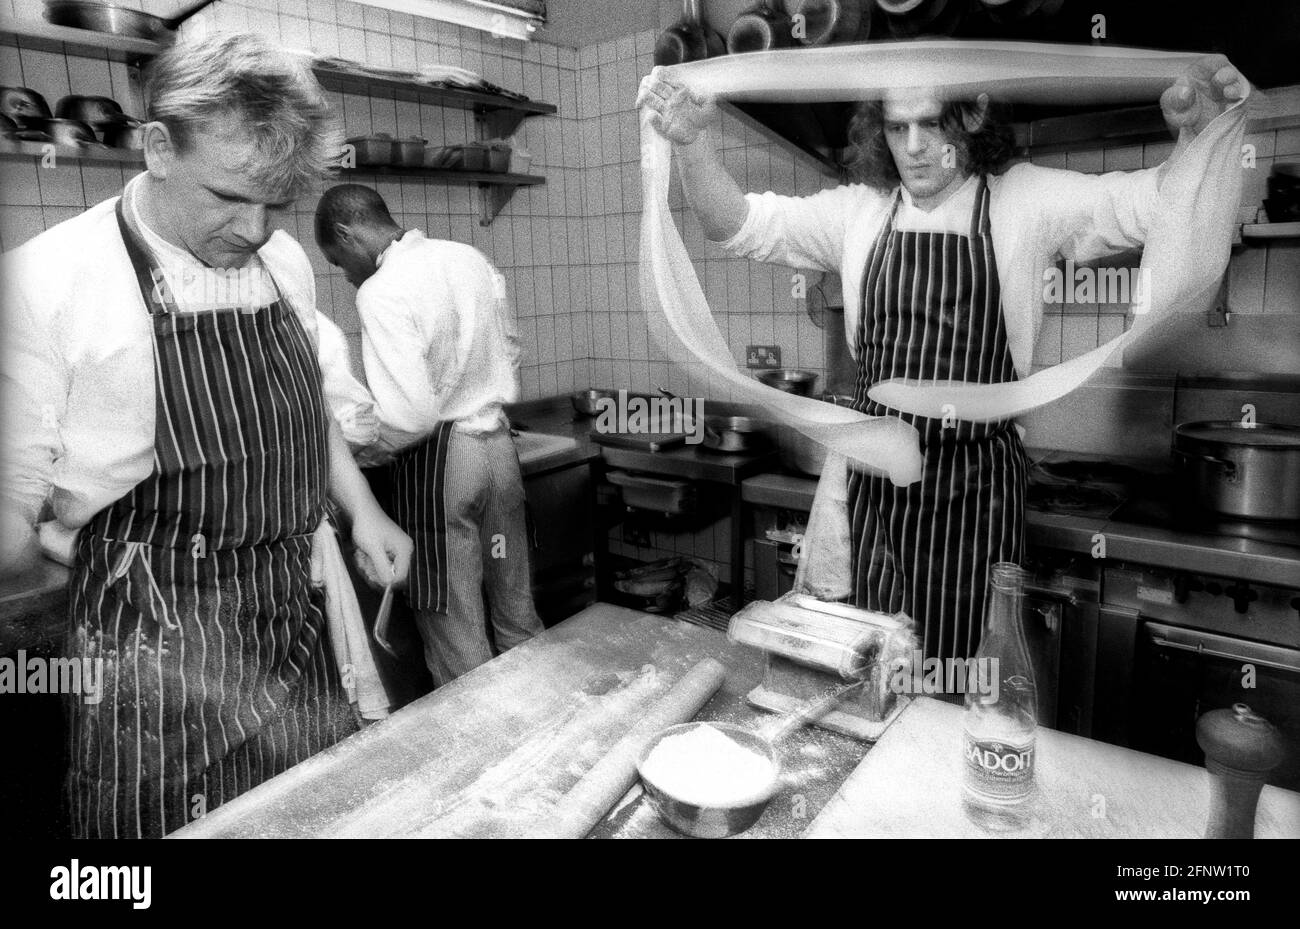 Celebrity chef Marco Pierre White with assistant or 2nd chef, Gordon Ramsey at Harvey's restaurant, during MPW's supremacy as London's top young chef. Stock Photo